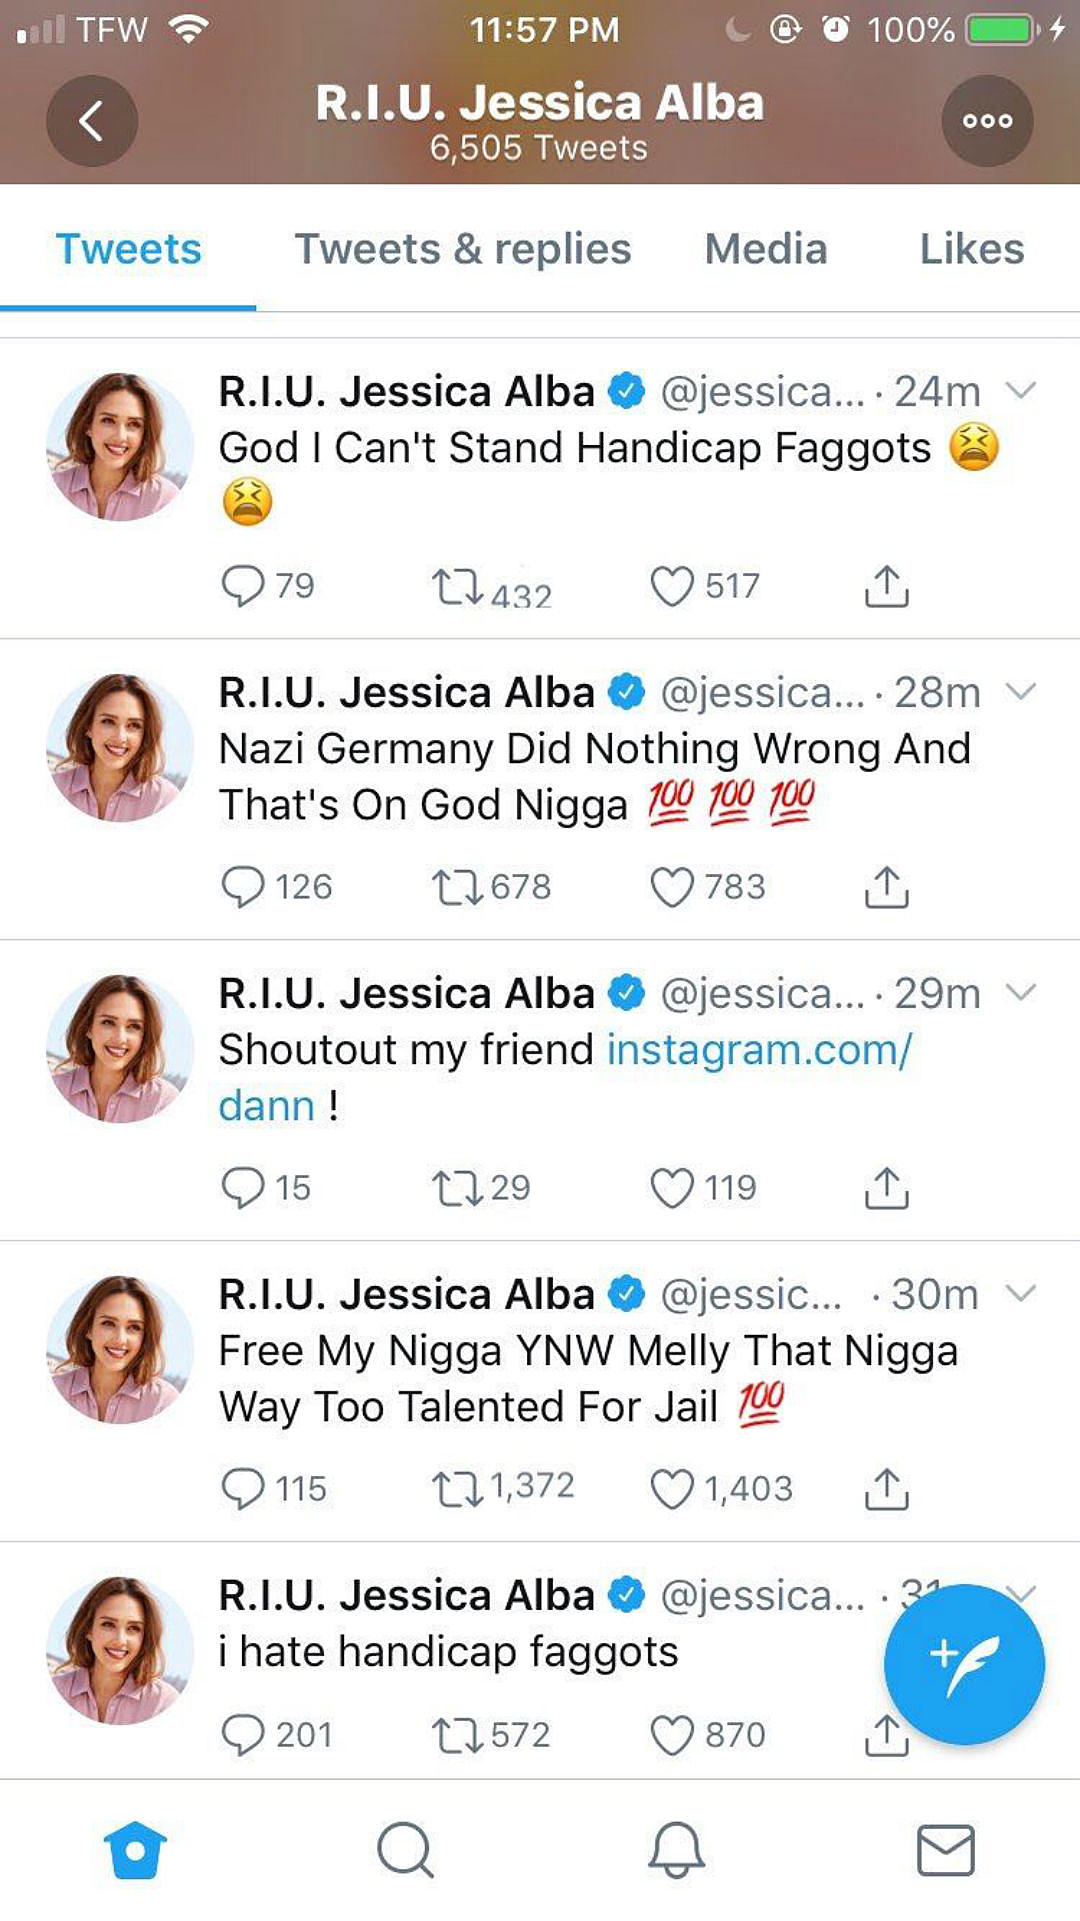 Jessica Alba's Twitter Gets Hacked, Tweets "Free YNW Melly"